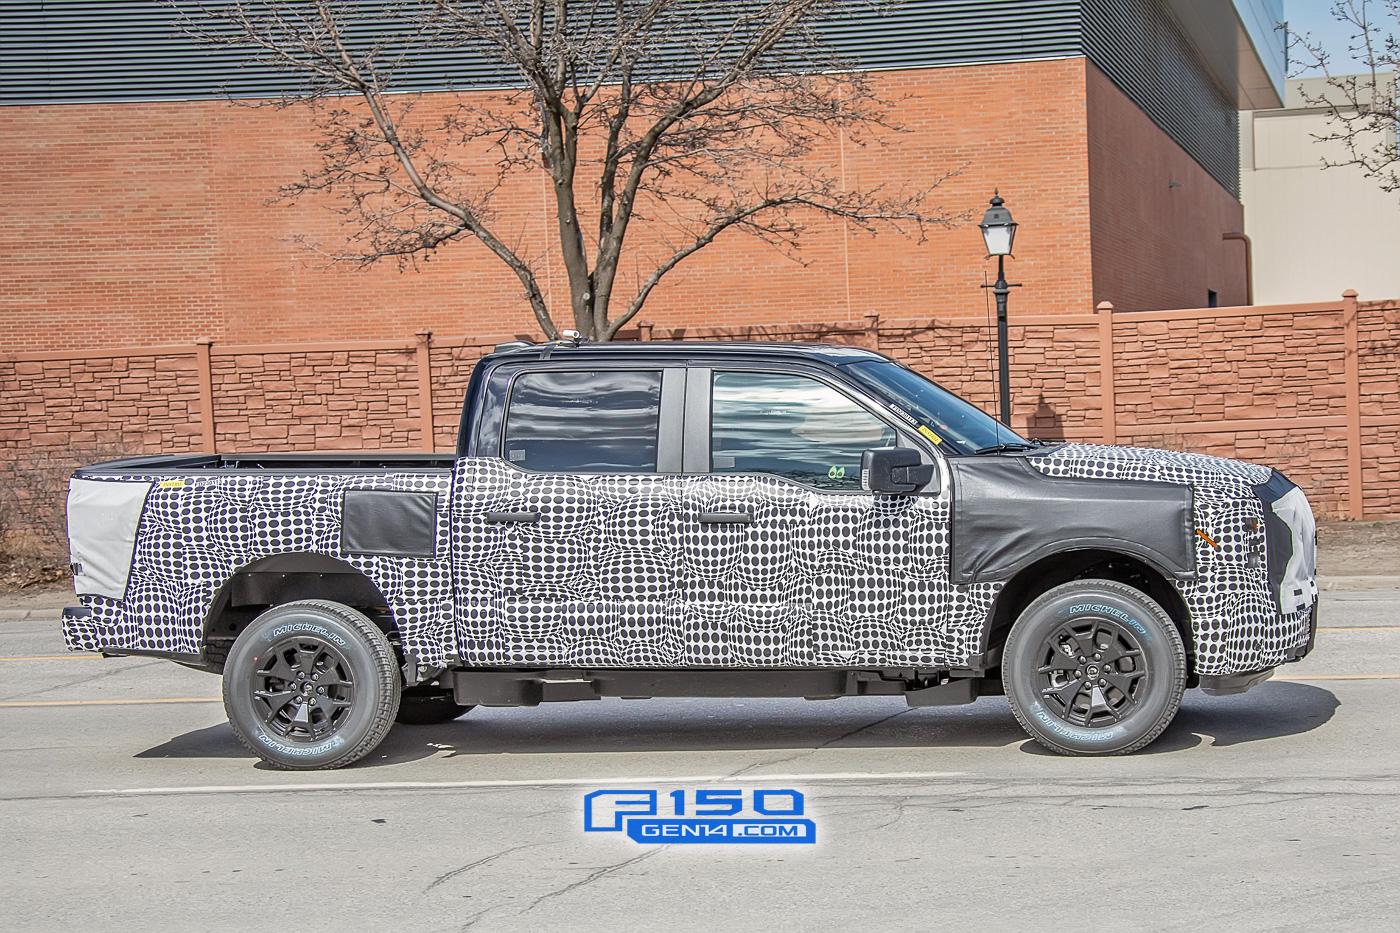 Ford F-150 Lightning Electric F-150 Prototype Caught With Large Mach-E-Style Infotainment Screen ev-f150-electric-mache-large-infotainment-screen-8